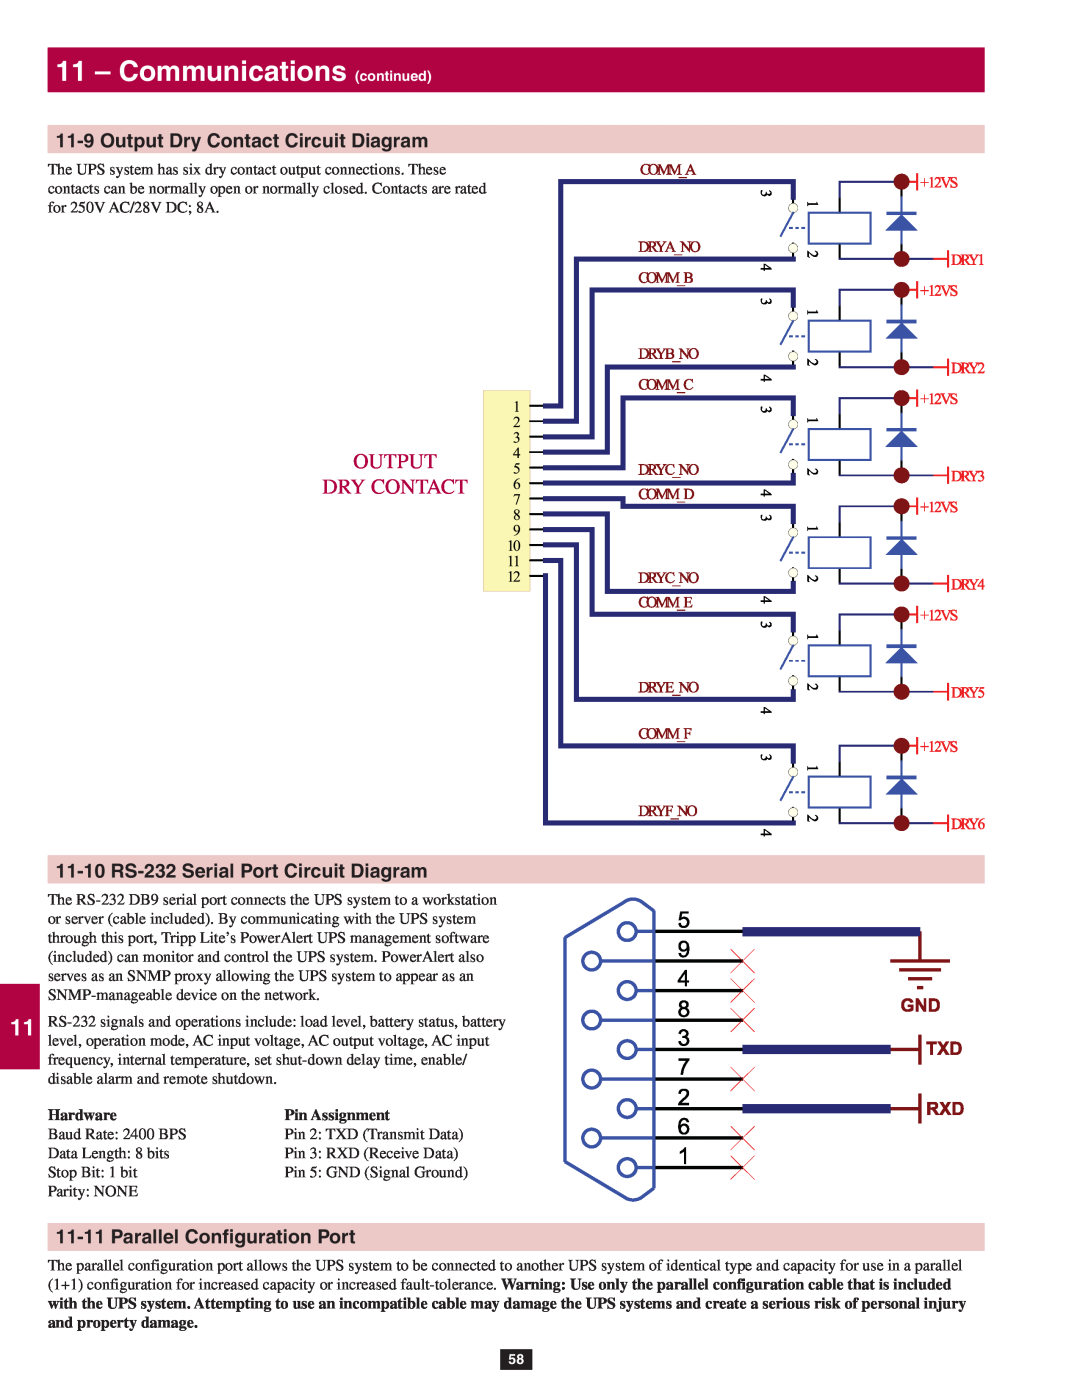 Tripp Lite SU20KX Output Dry Contact Circuit Diagram, 11-10 RS-232 Serial Port Circuit Diagram, Hardware, Pin Assignment 